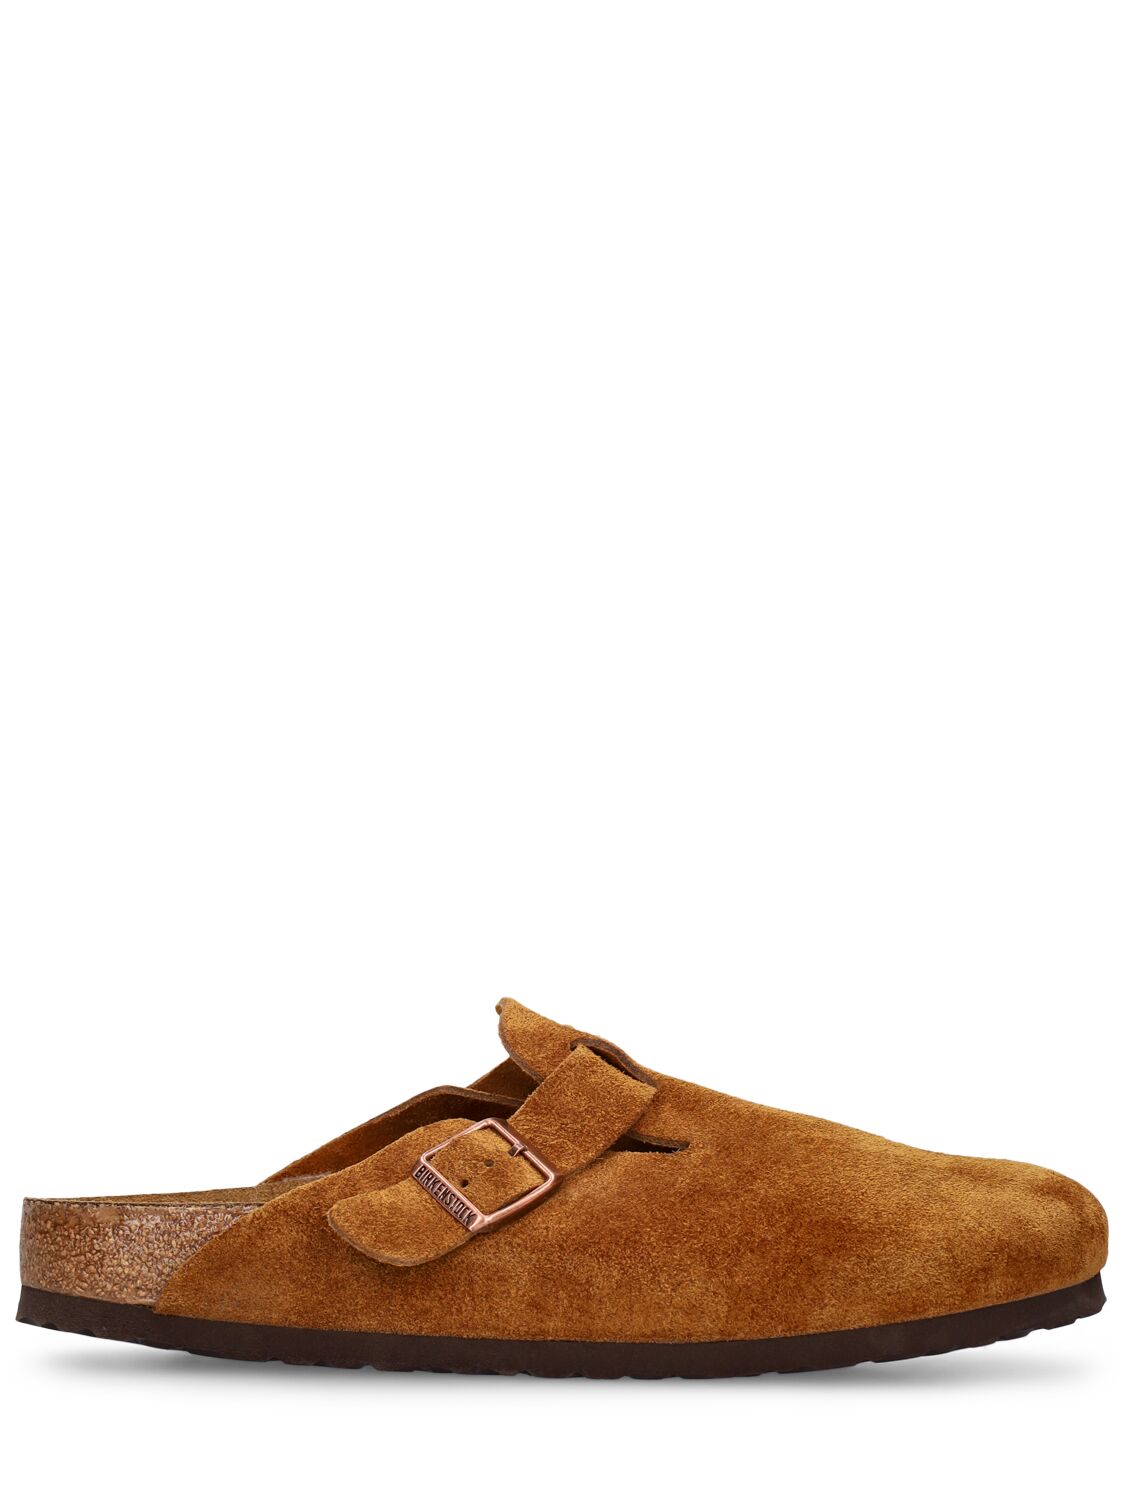 Boston Sfb Suede Leather Loafers